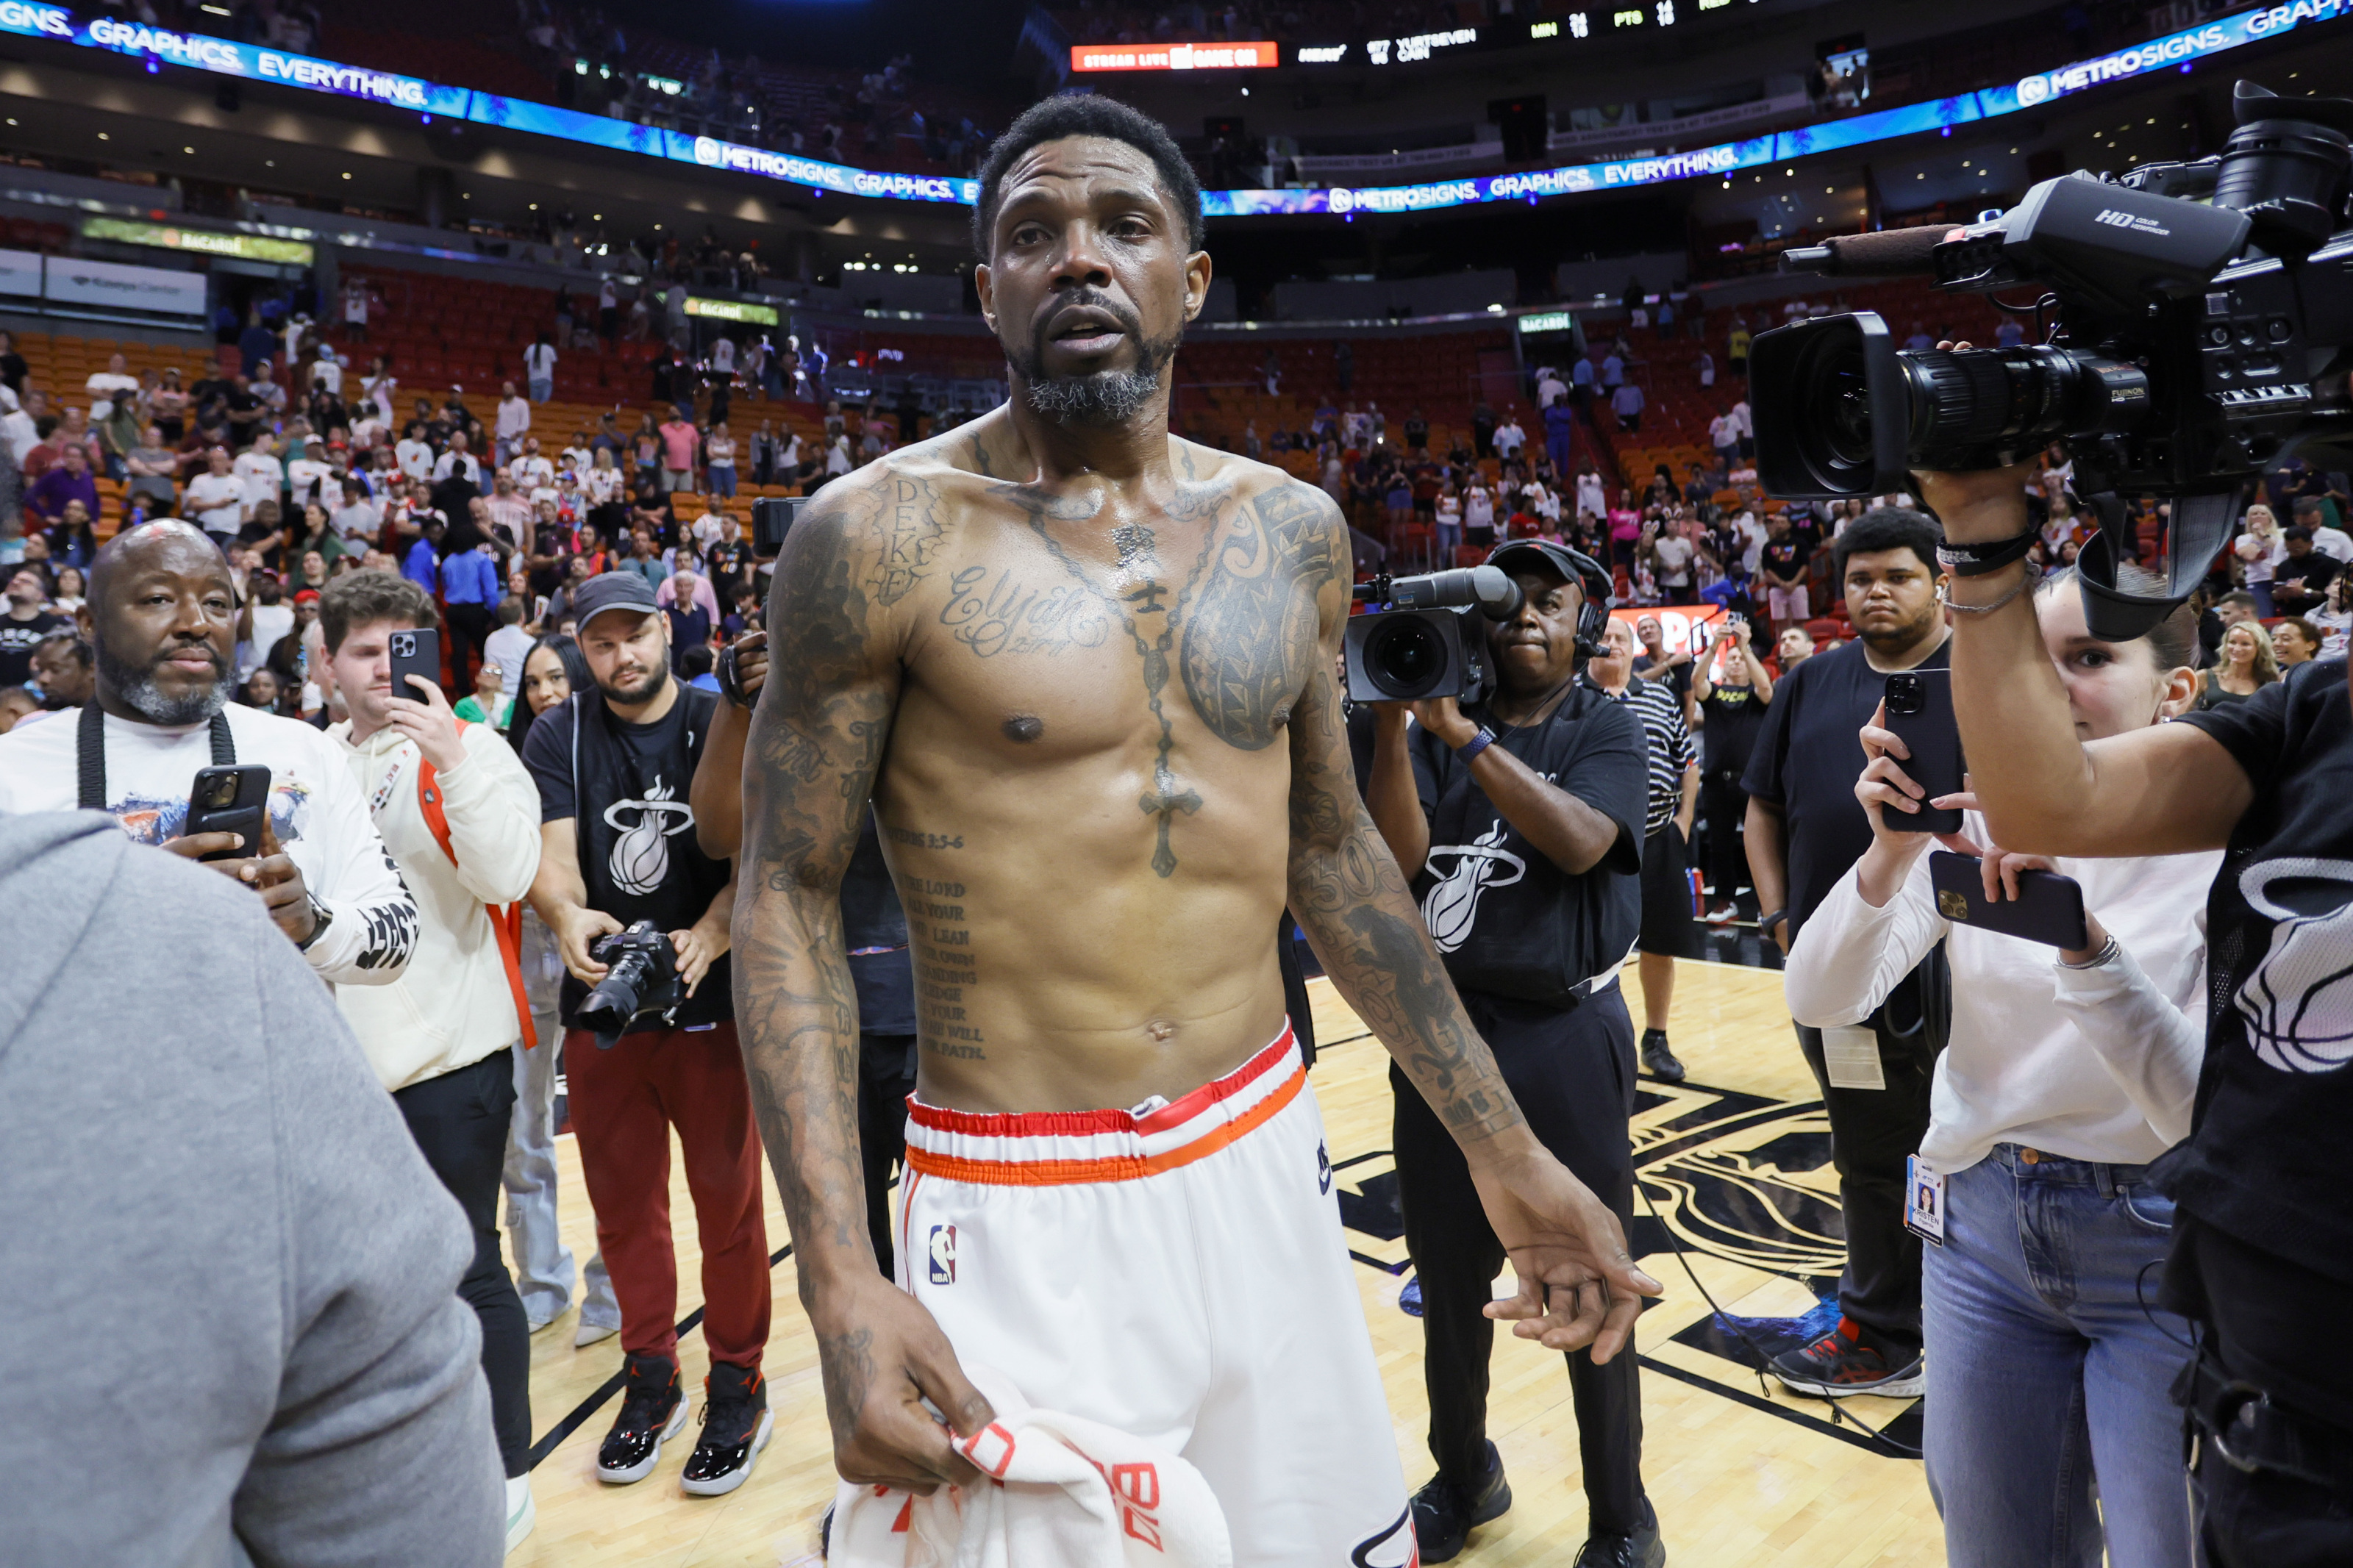 Inside Udonis Haslem's final game: 'Couldn't have envisioned it